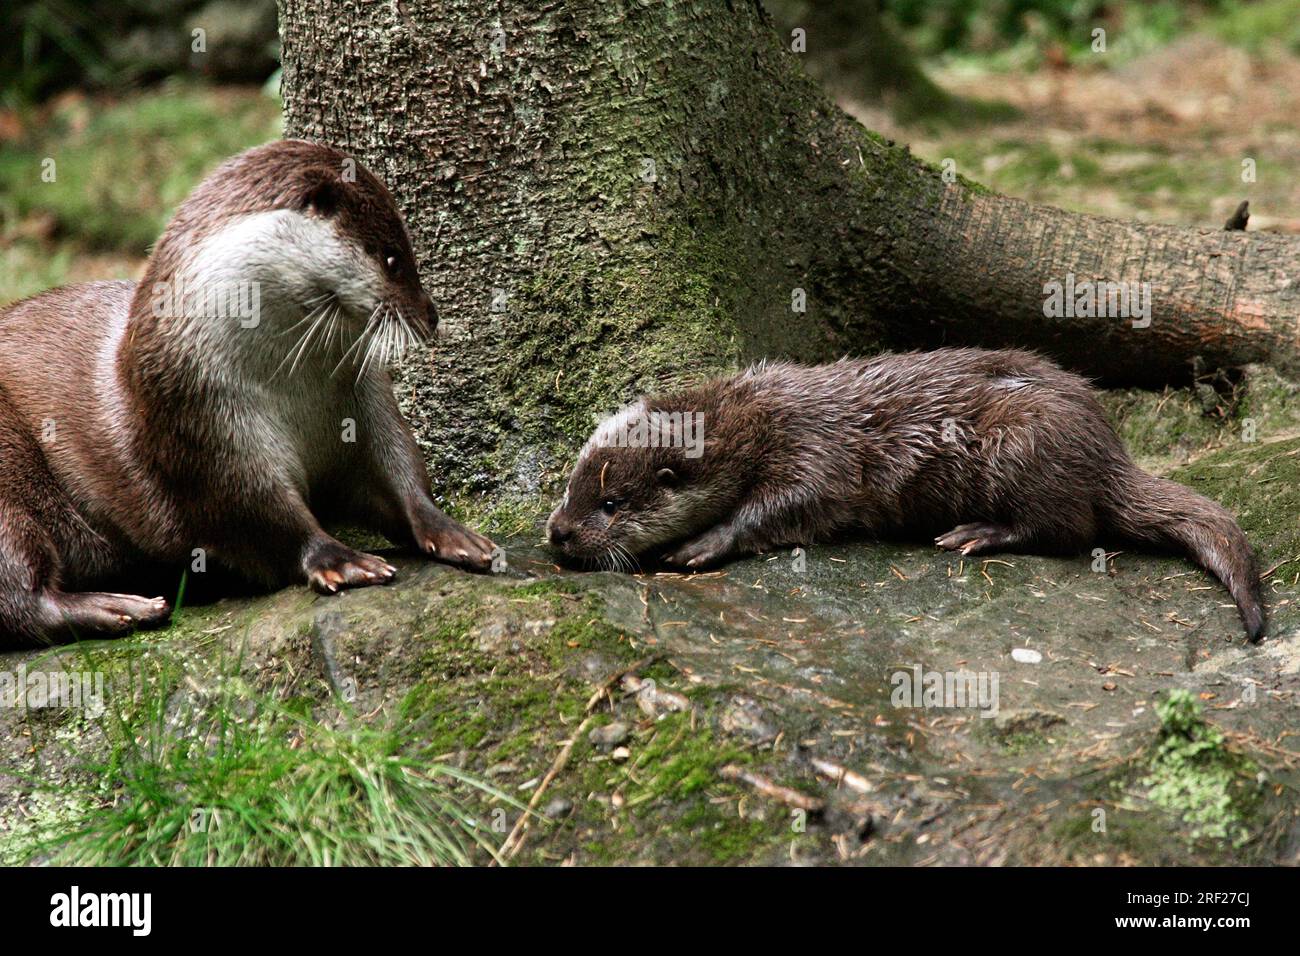 European Otter (Lutra lutra) with young Stock Photo